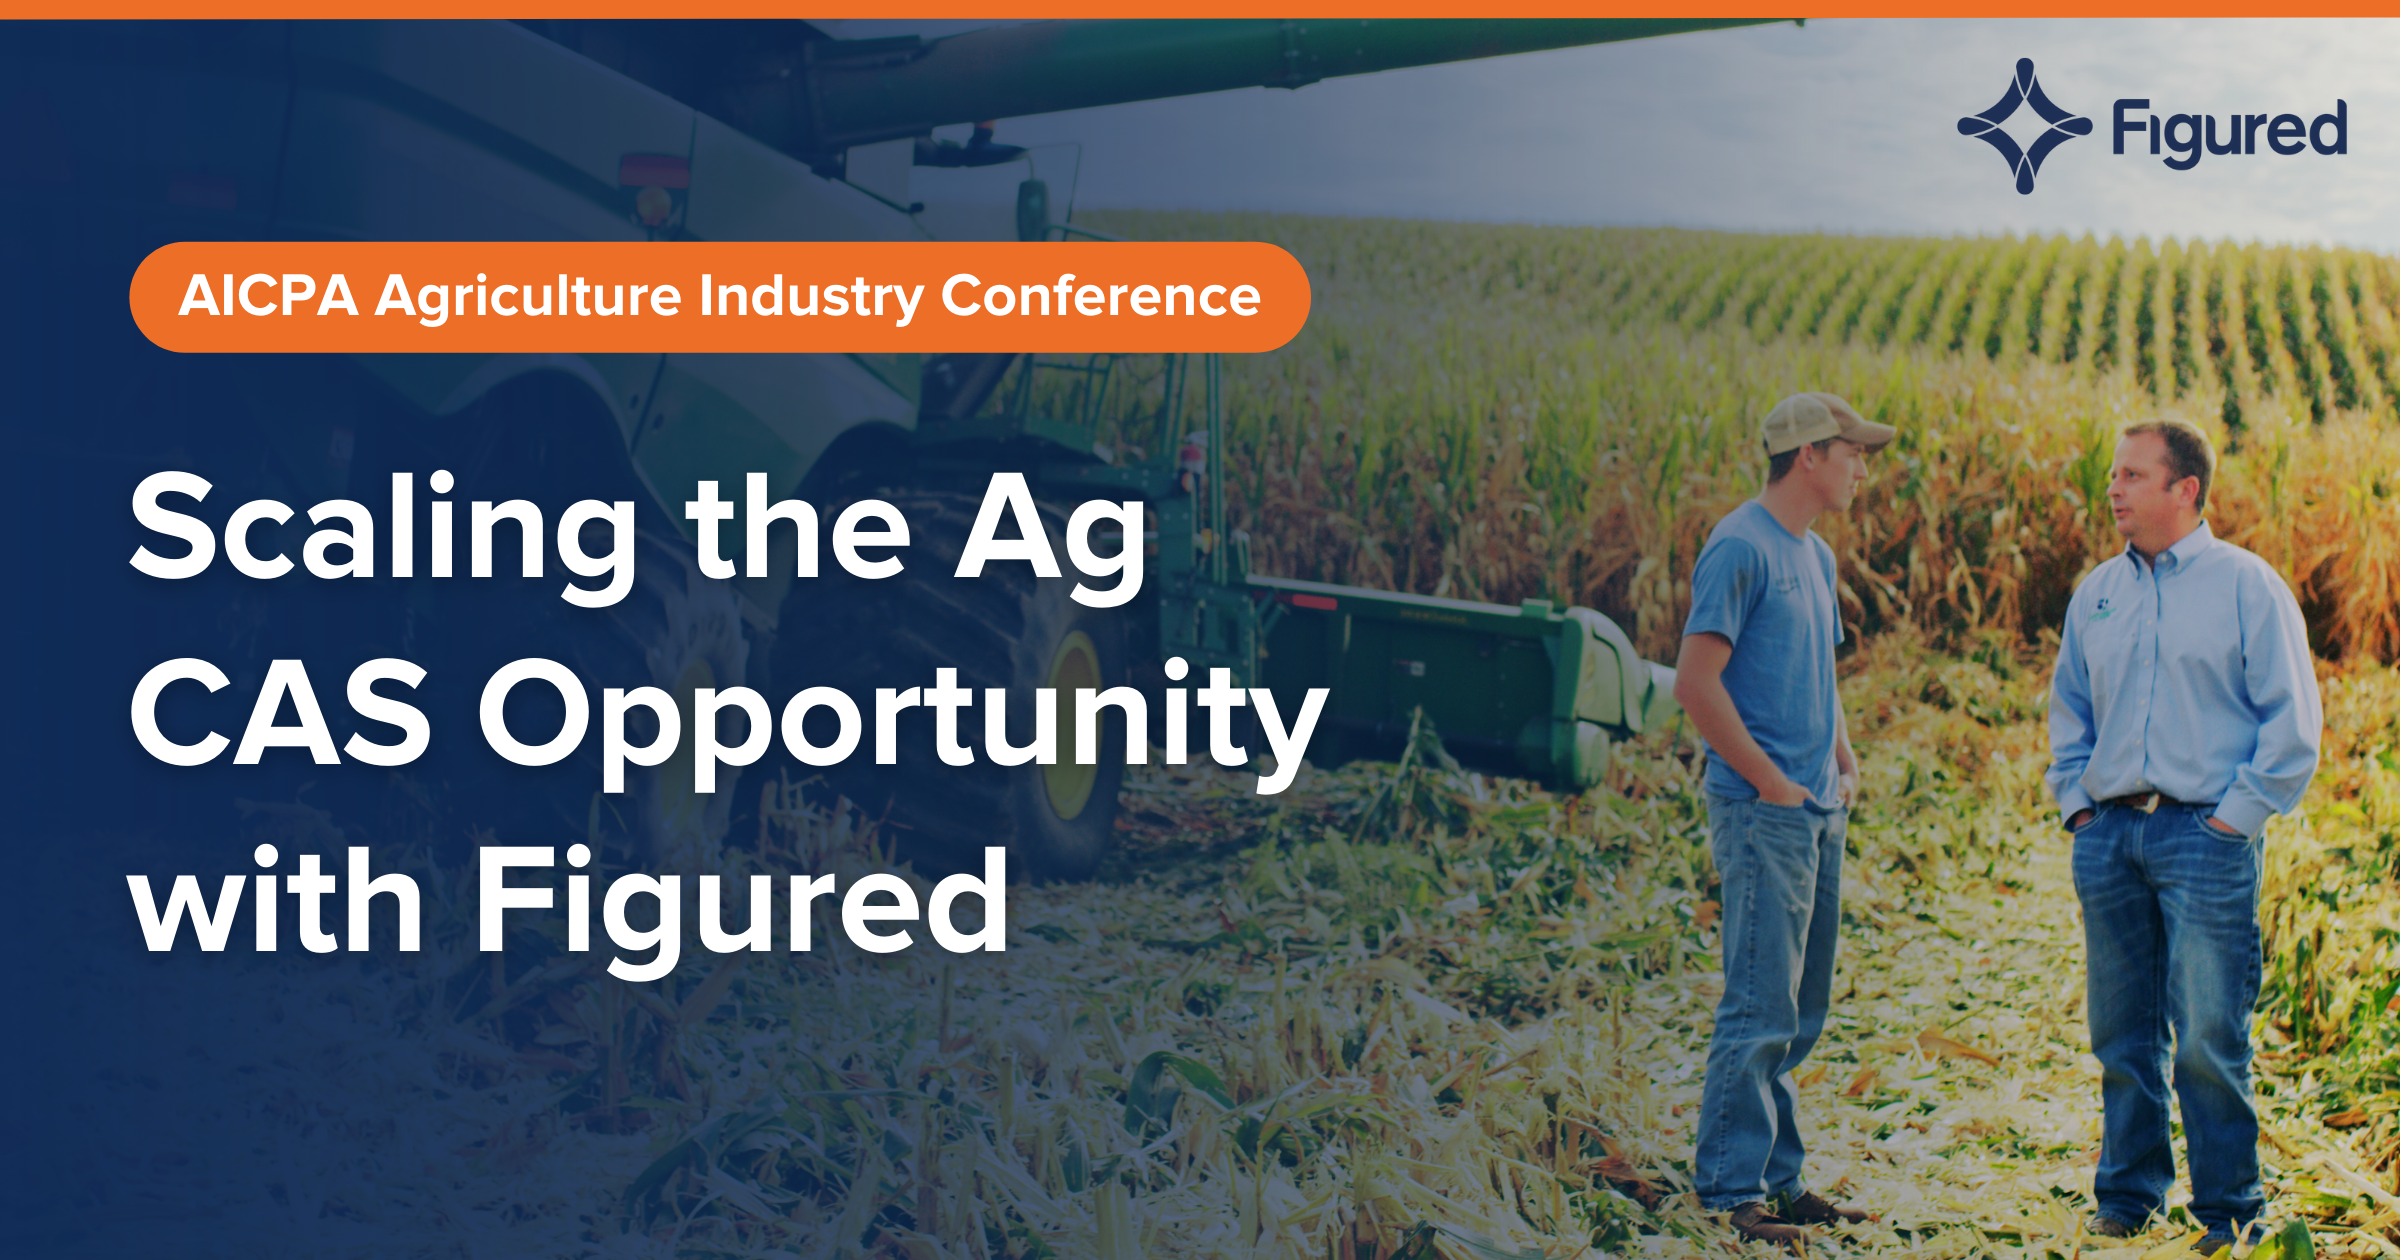 Scaling the Ag CAS Opportunity: Figured & Intuit at AICPA Agriculture Conference